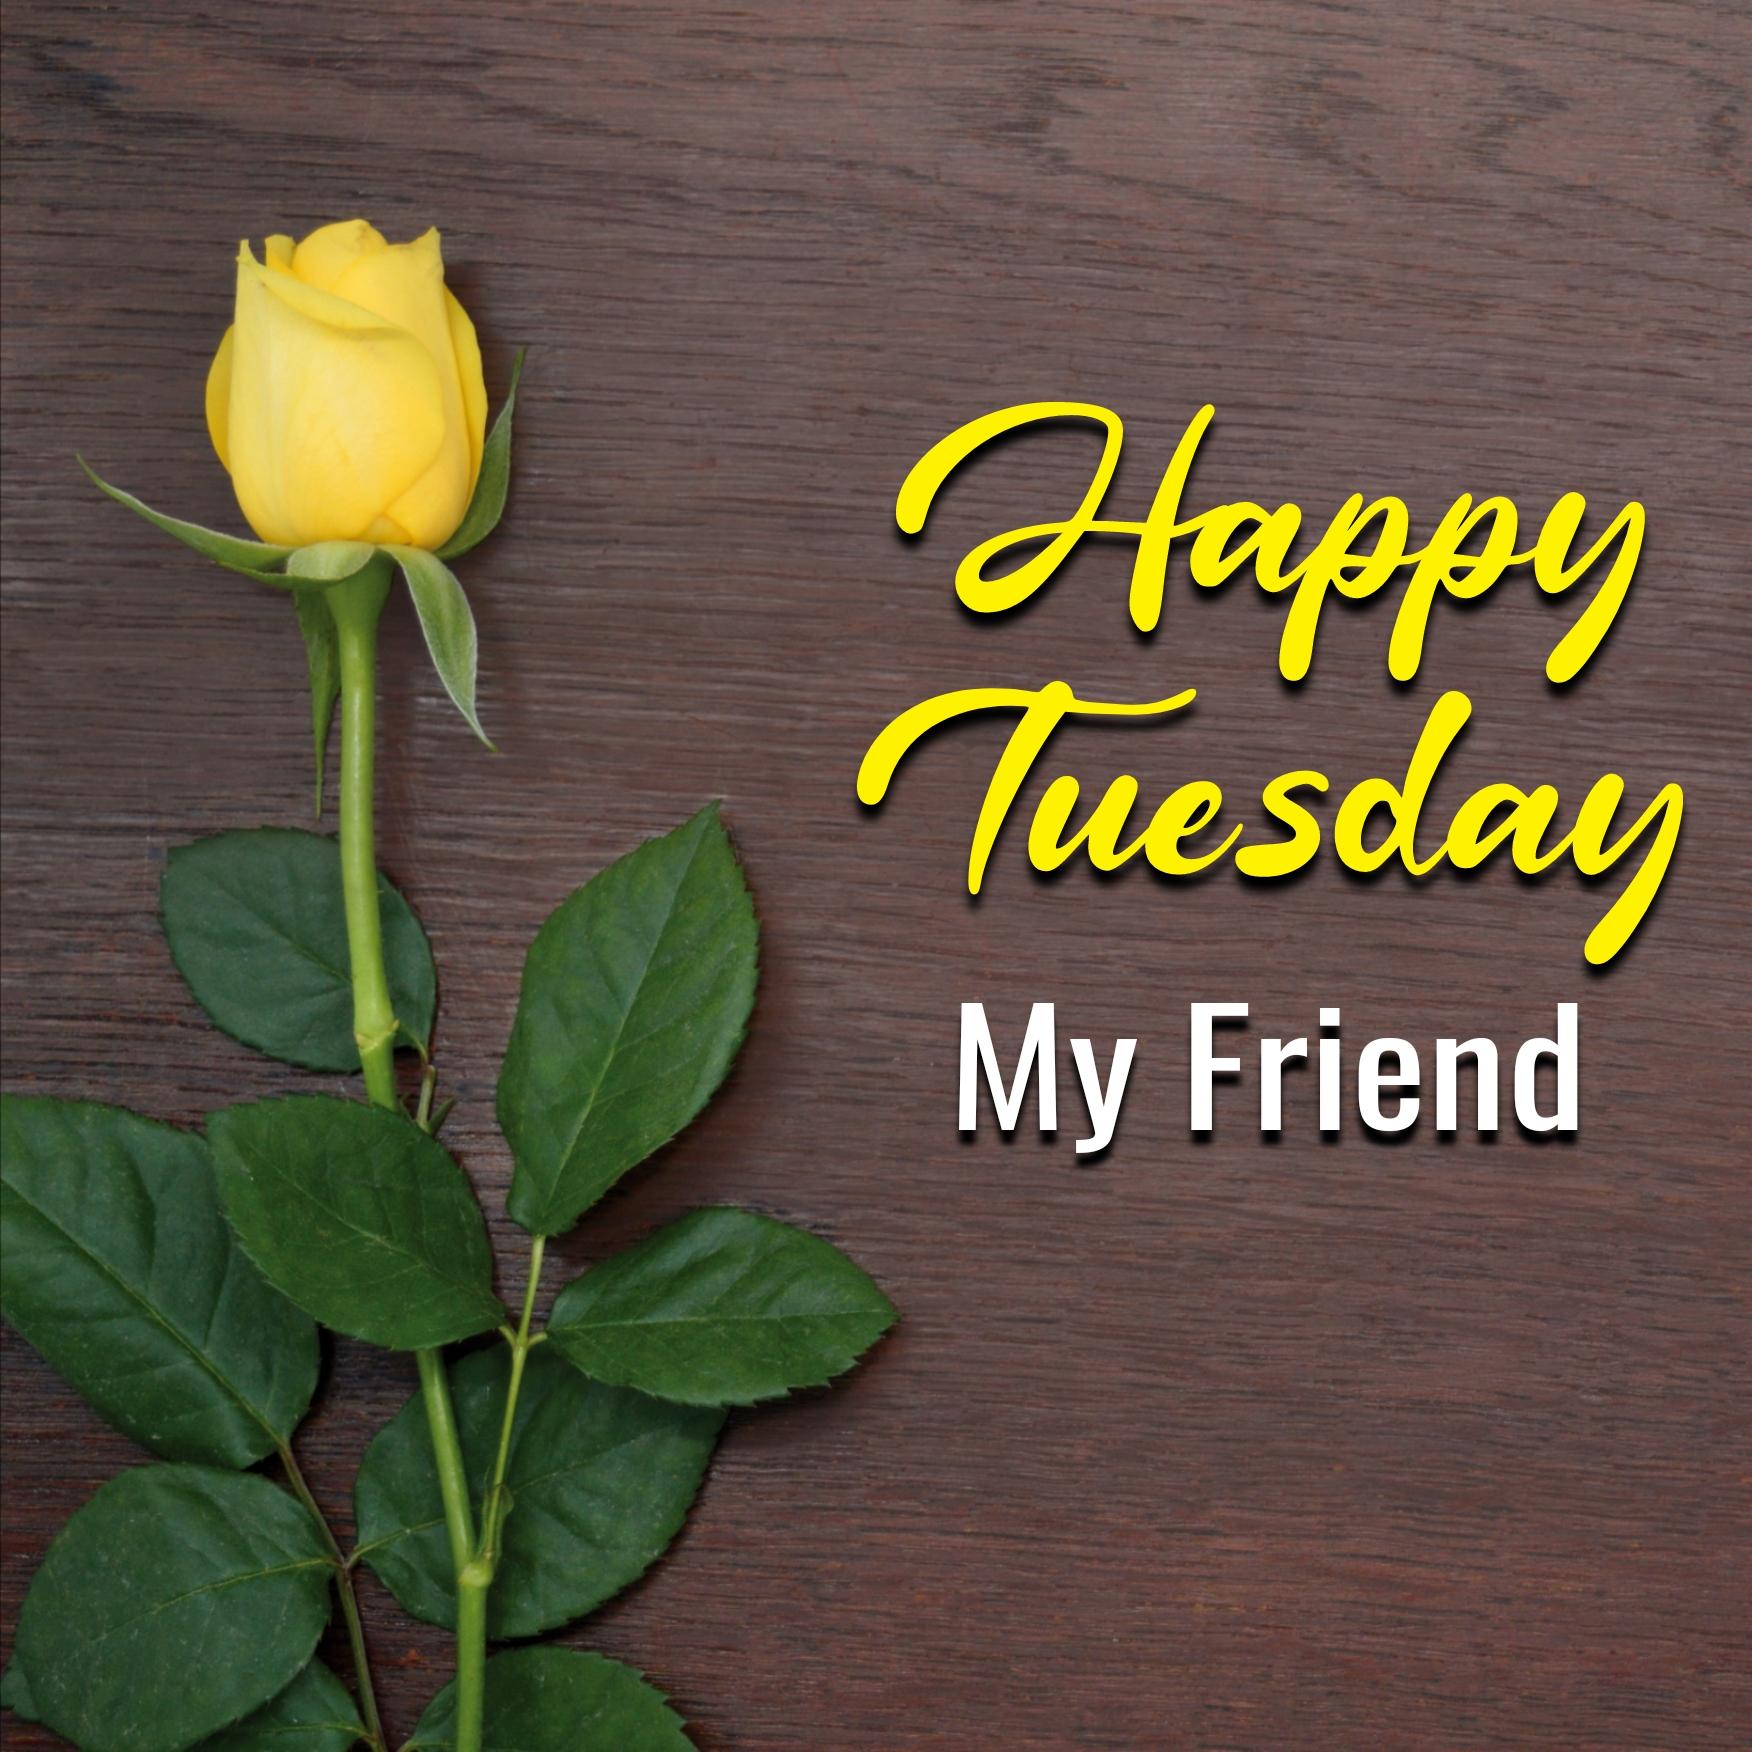 Happy Tuesday My Friend Images